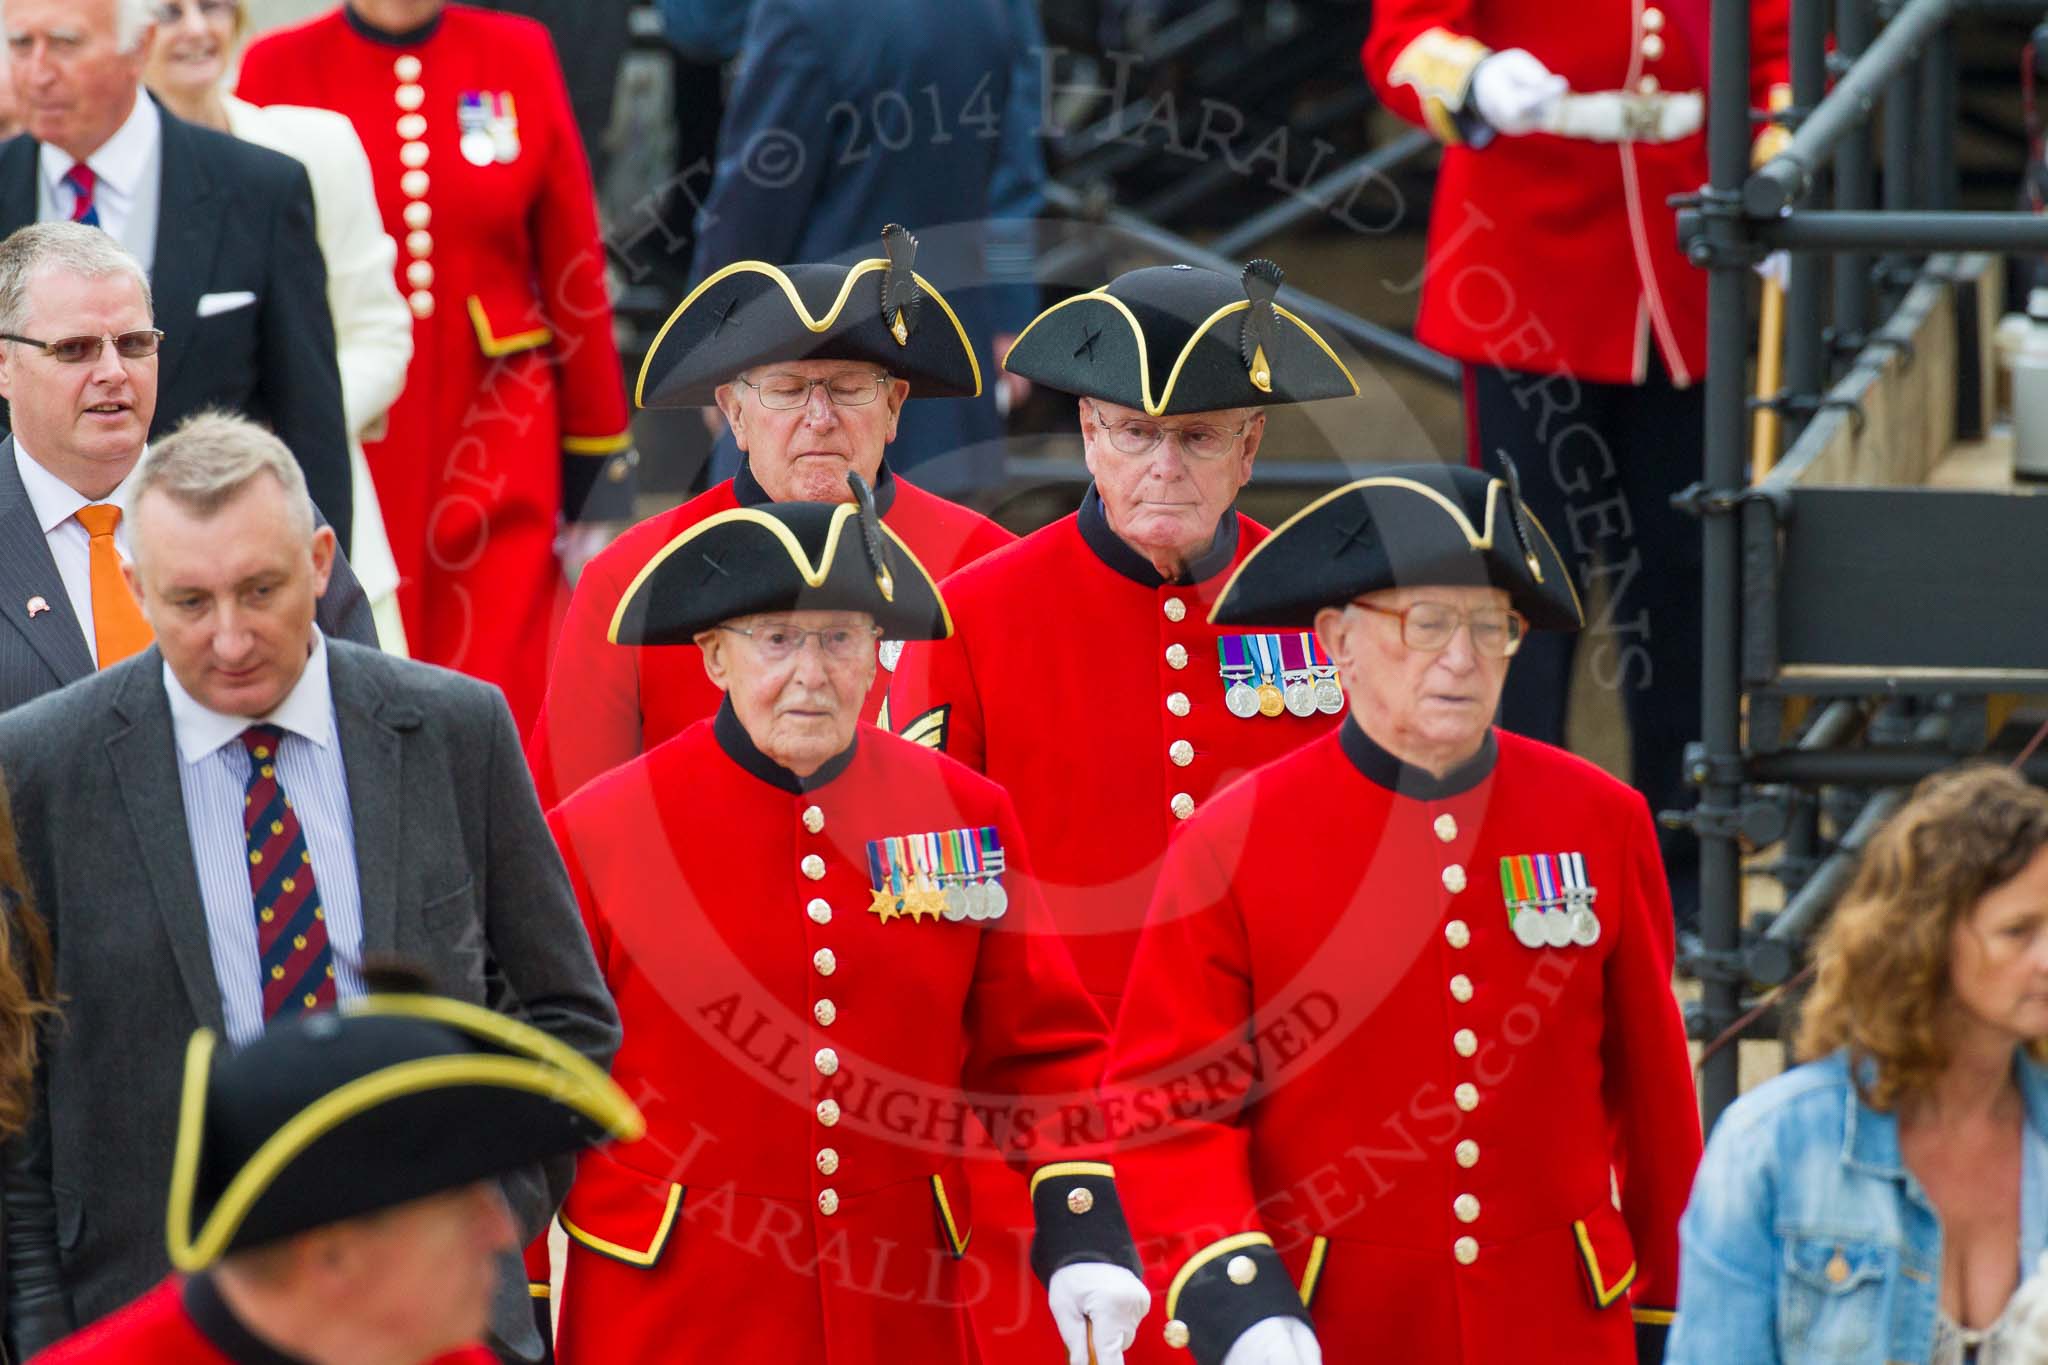 Trooping the Colour 2014.
Horse Guards Parade, Westminster,
London SW1A,

United Kingdom,
on 14 June 2014 at 12:19, image #929